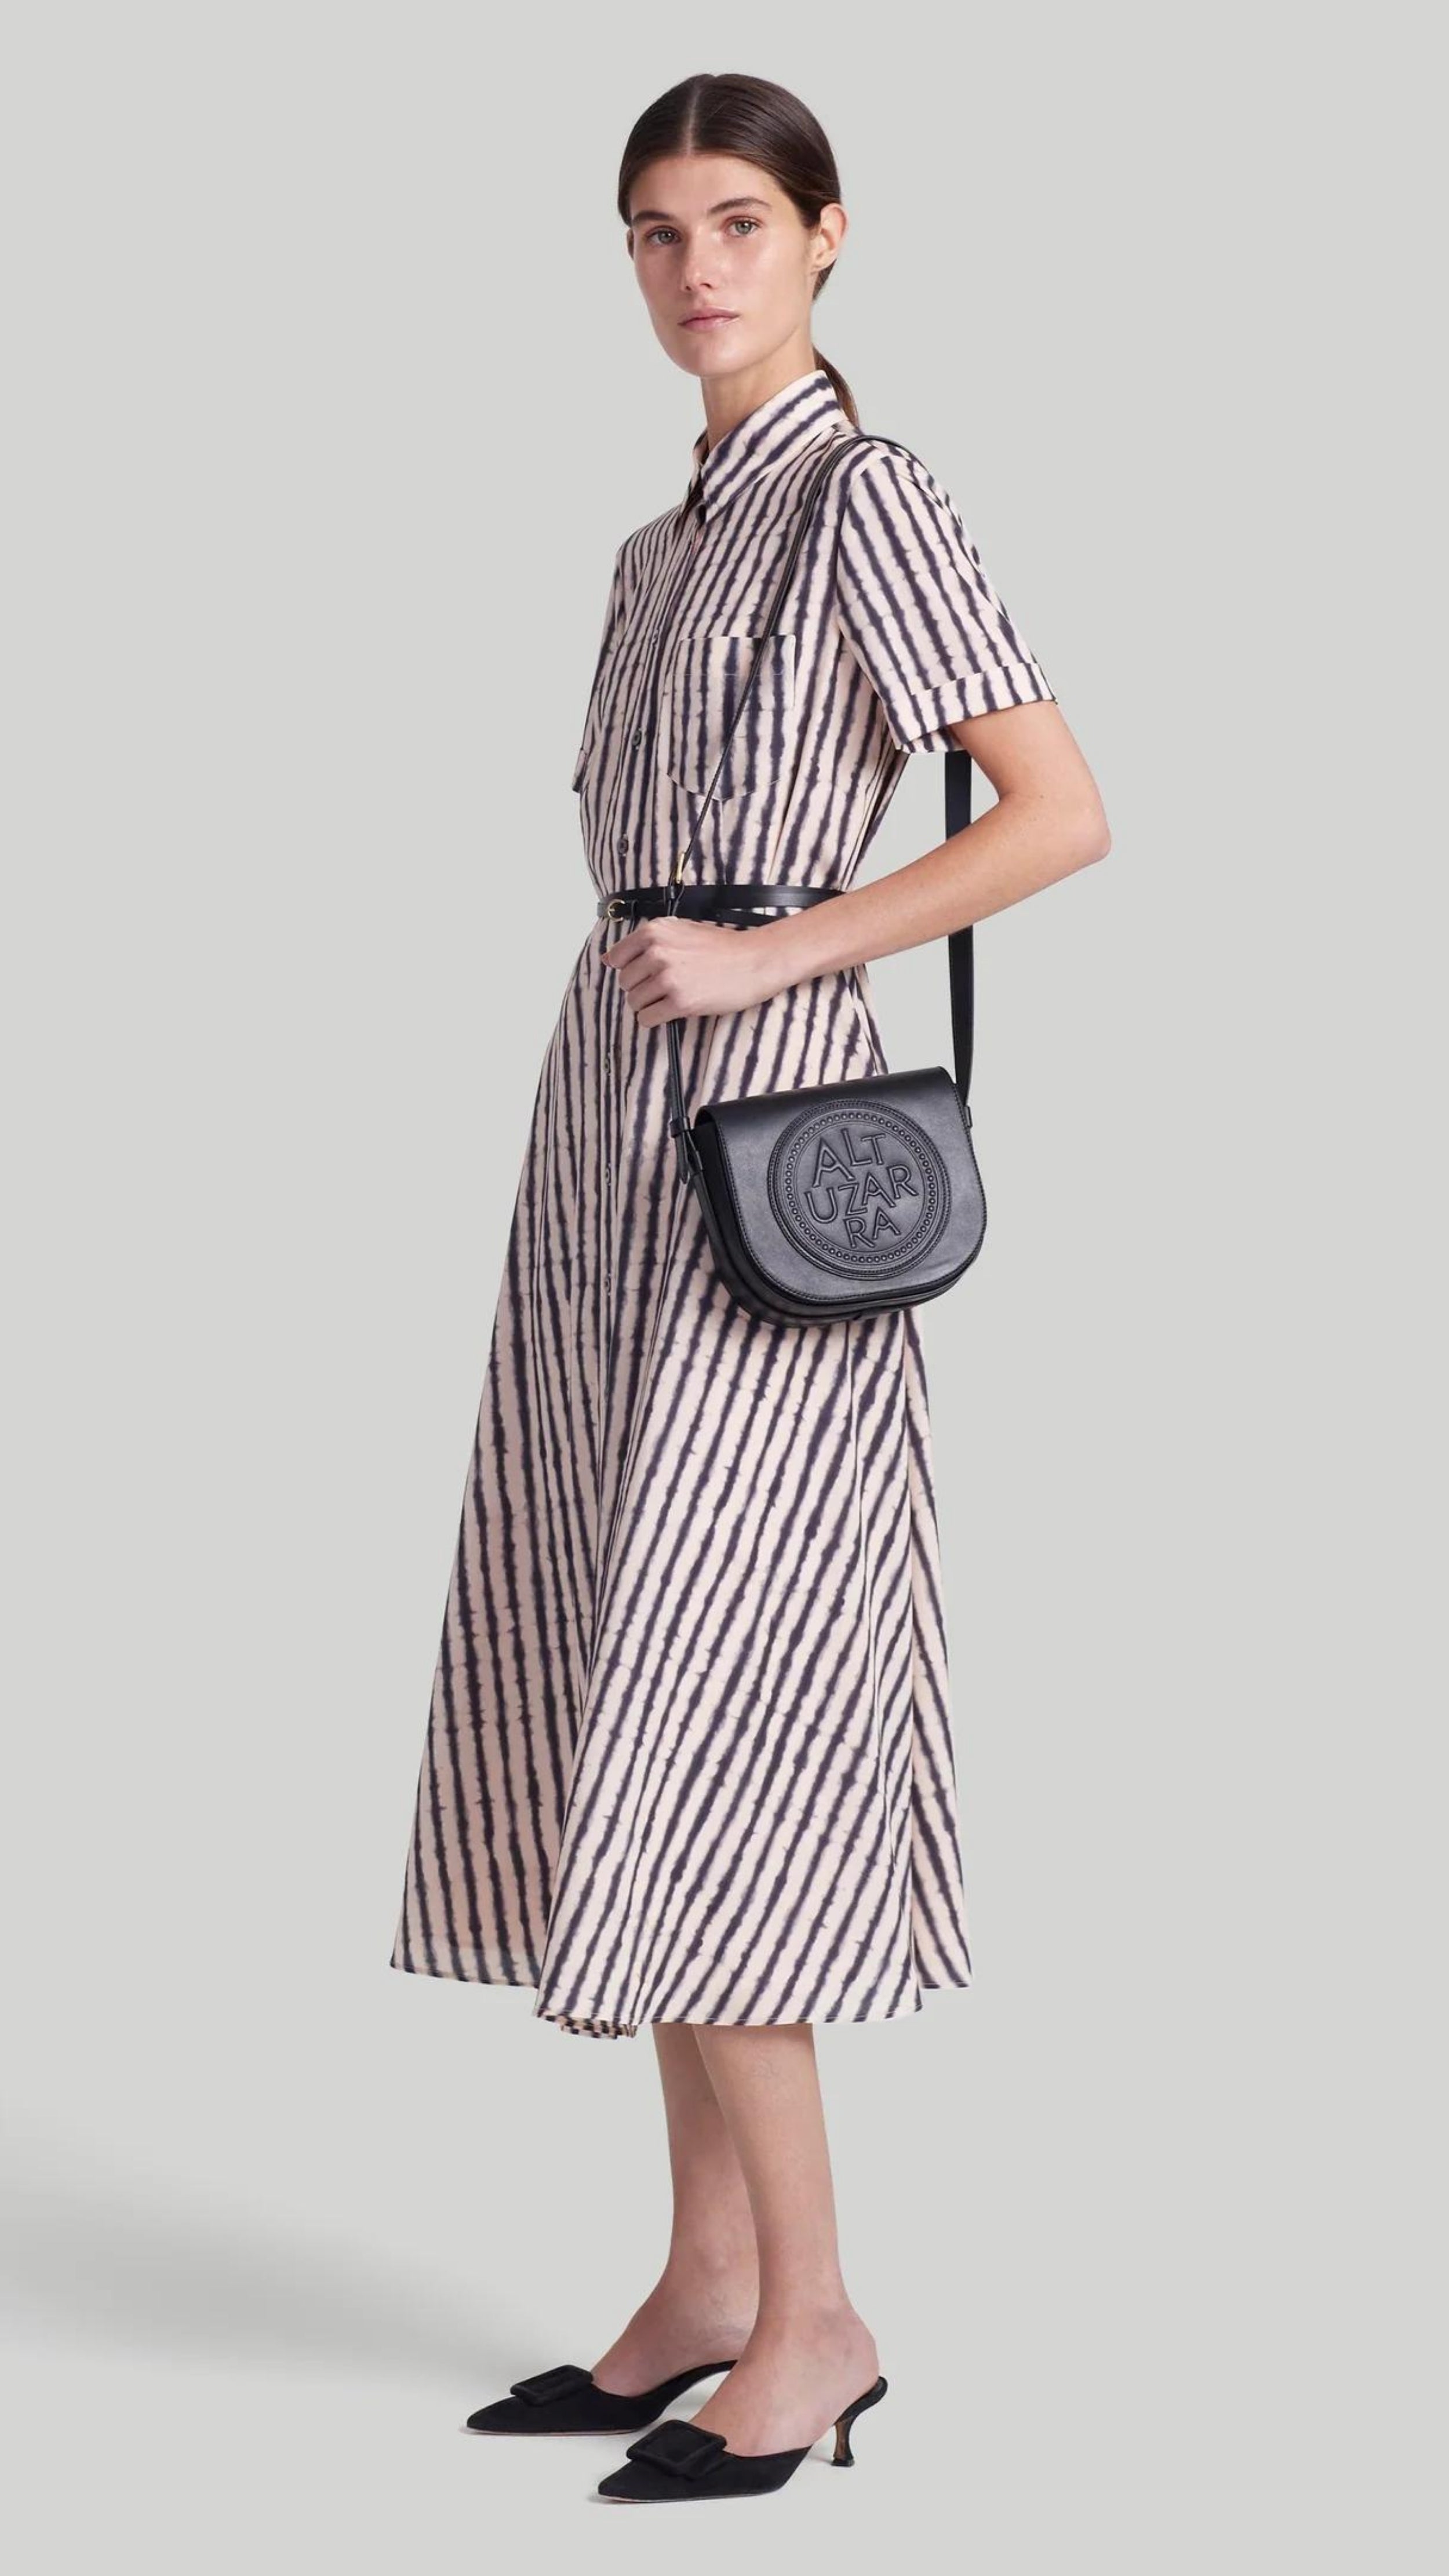 Altuzarra Kiera Dress The 'Kiera' dress is designed with a small point collar, short sleeves and a flattering A-line skirt. It is detailed with a slim leather waist belt and features a black and white stripe pattern and a front breast pocket. Shown on model facing front and side.